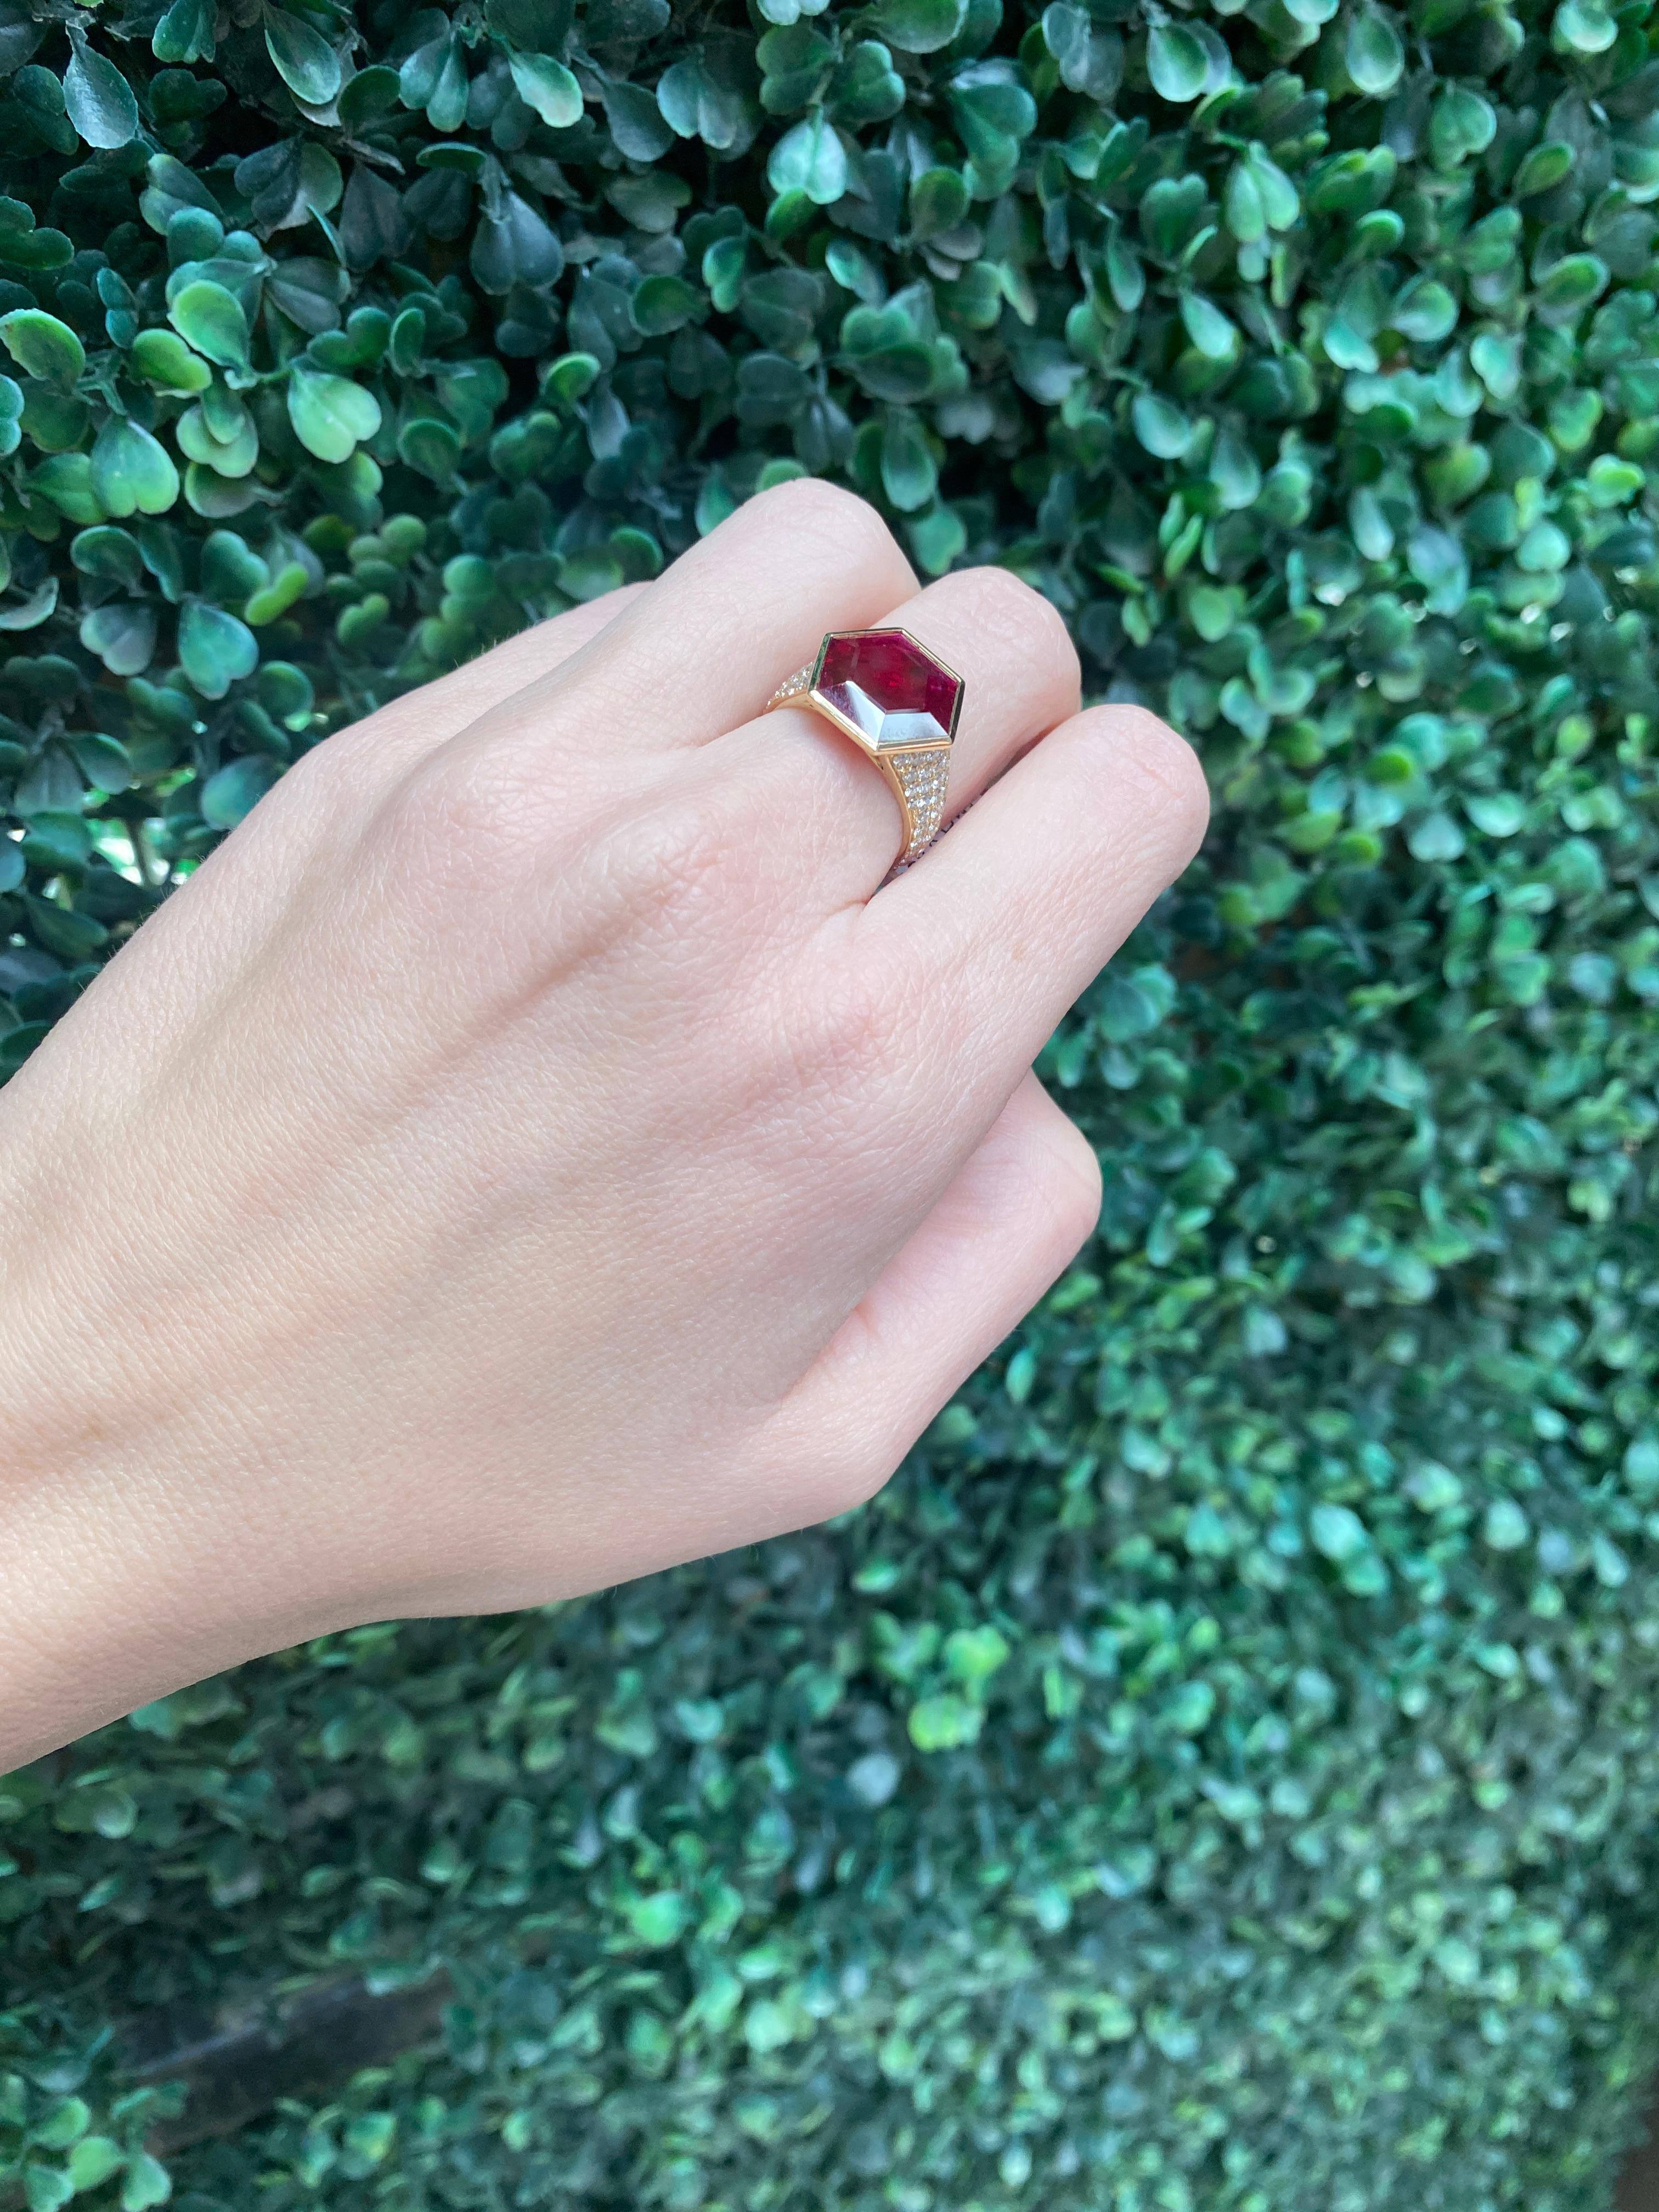 GIA Certified 5.51ct Hexagonal Cut Mozambique Ruby 18k Cocktail Ring For Sale 6